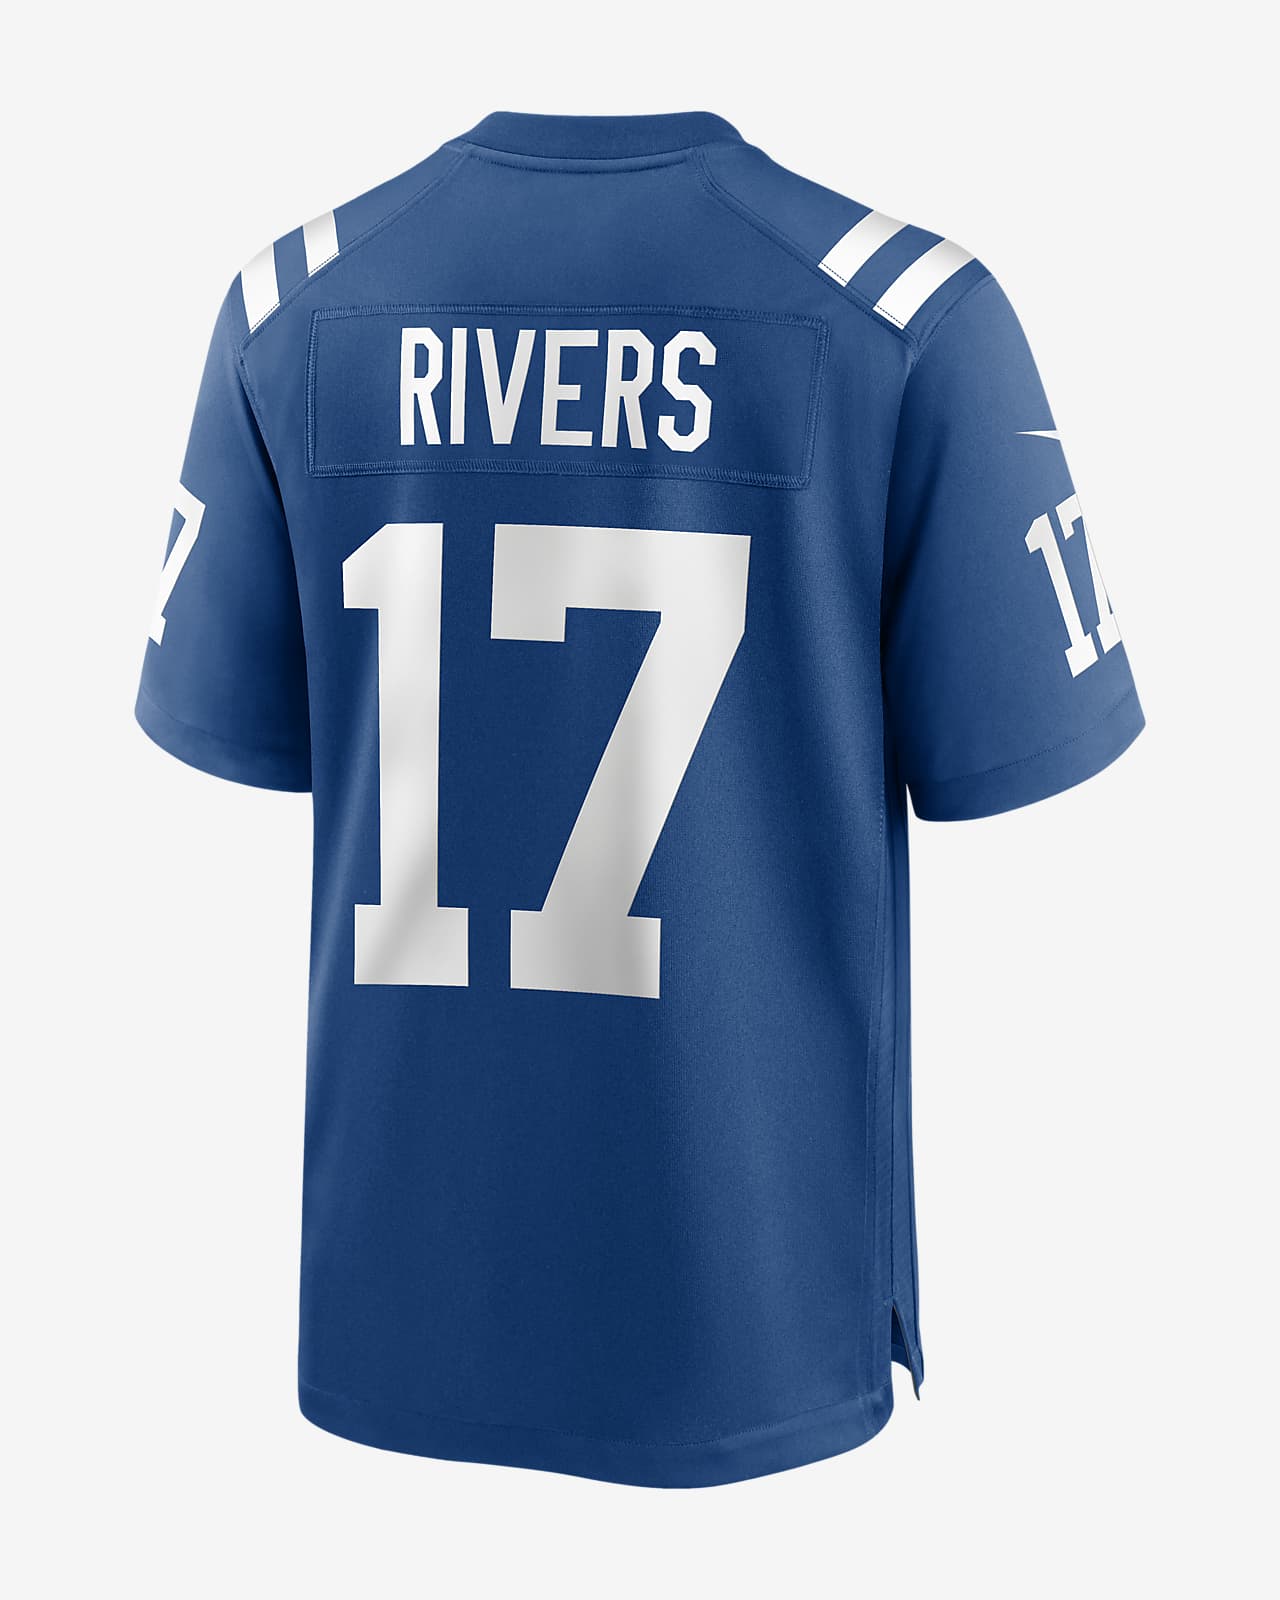 NFL Indianapolis Colts (Philip Rivers) Men's Game Football Jersey